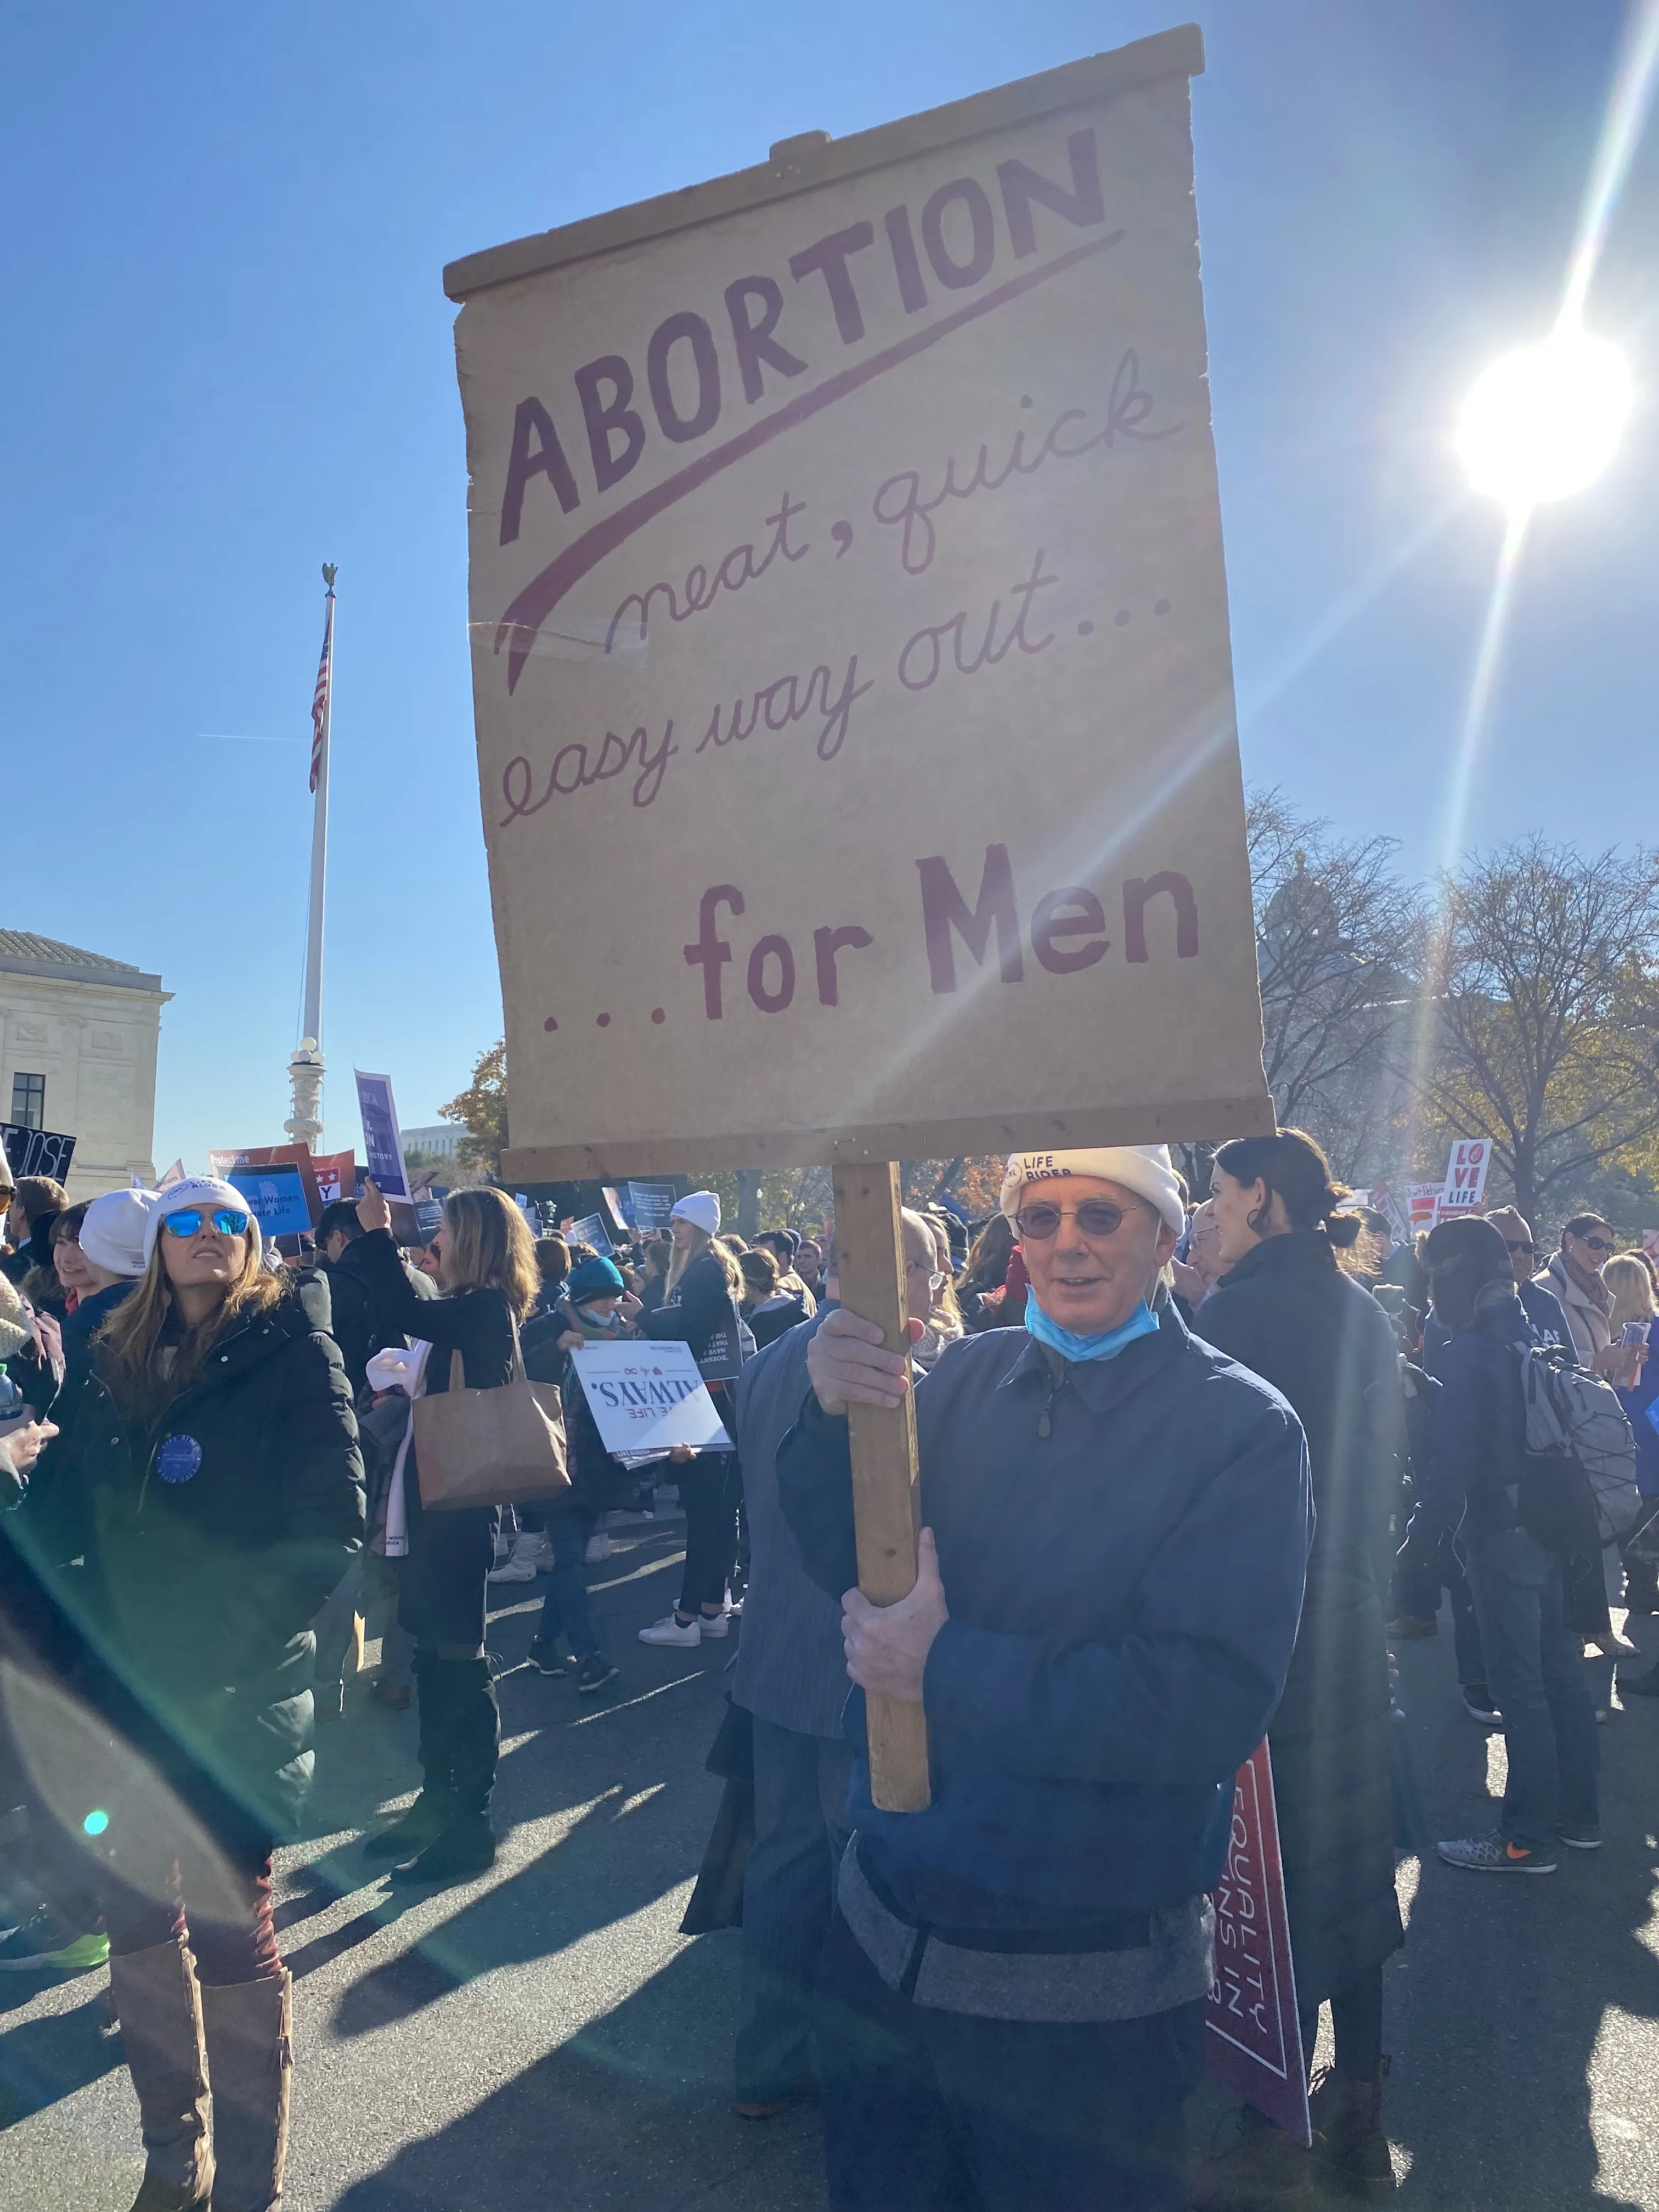 Stephen Kosciesza, from the Maryland suburbs of Washington, D.C., attended the pro-life rally outside the Supreme Court on Dec. 1, 2021. Katie Yoder/CNA